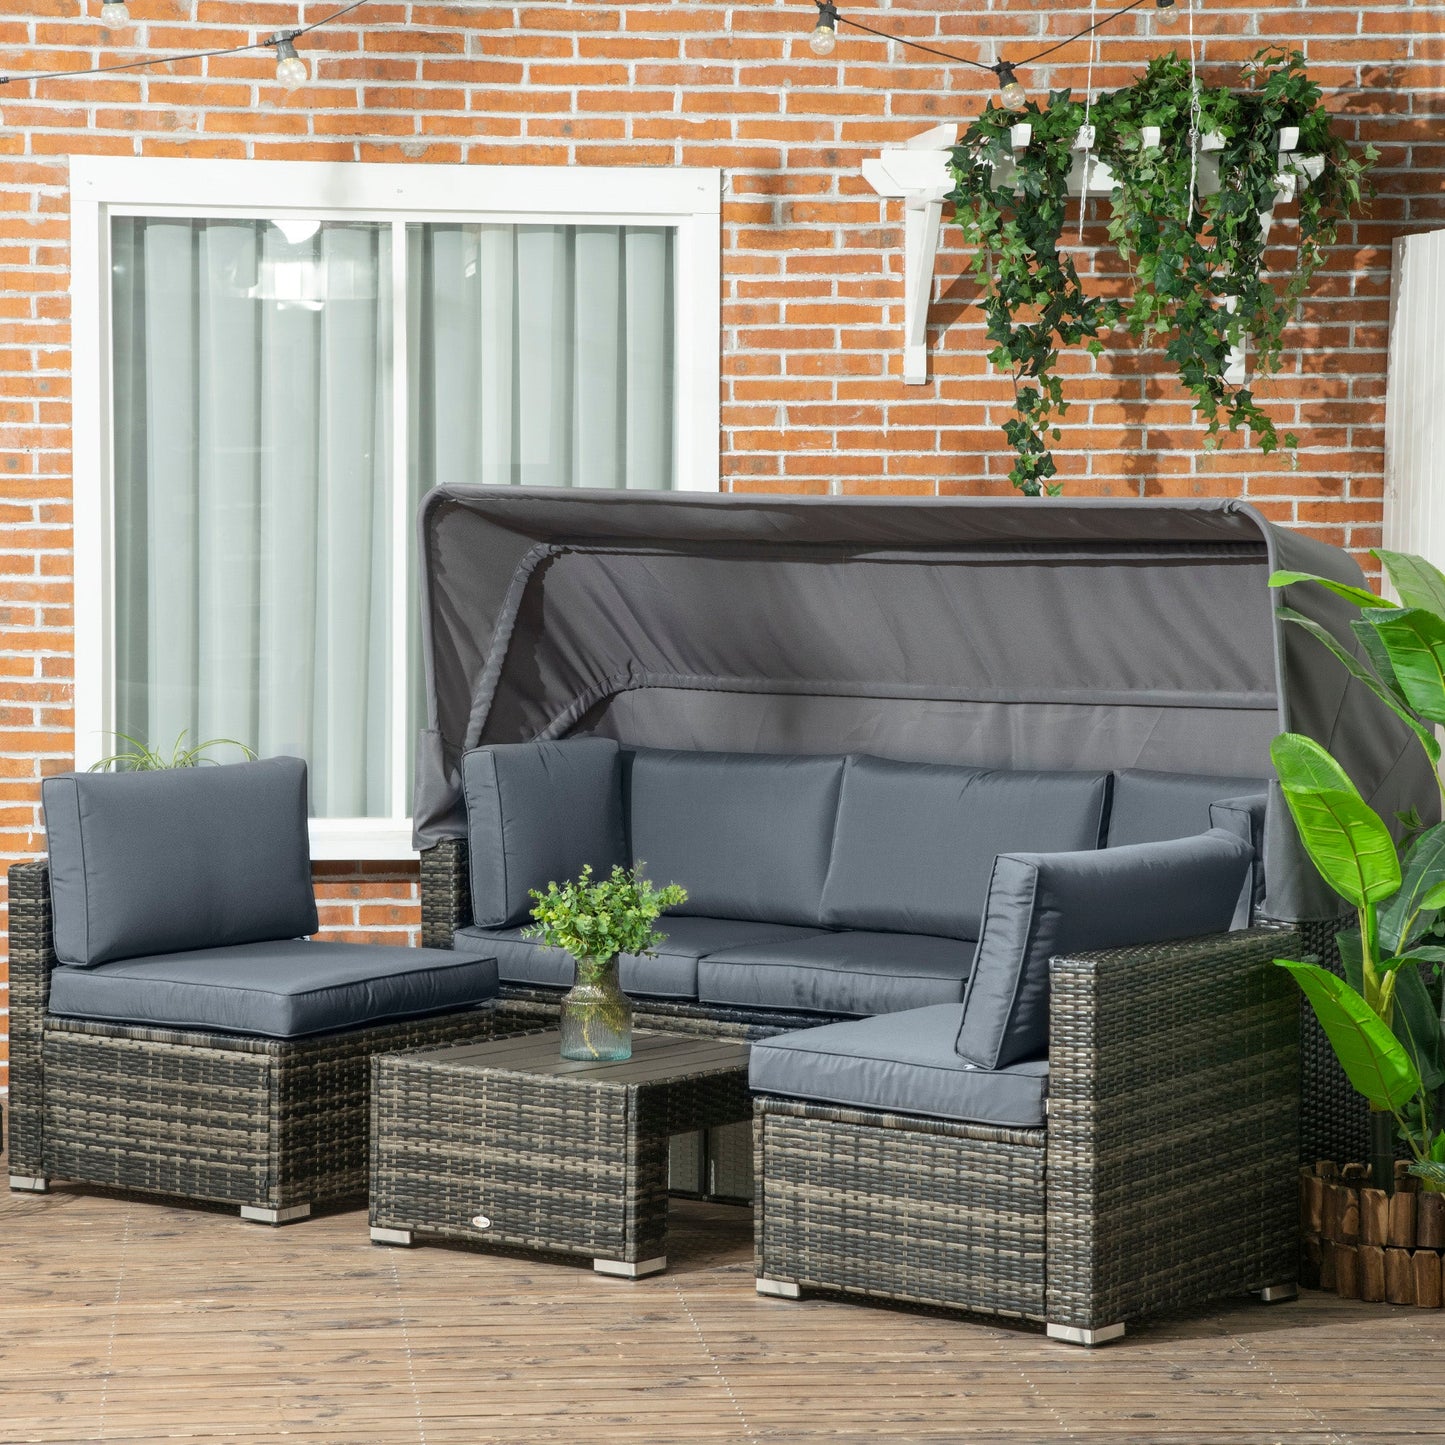 Outdoor and Garden-4 Piece Patio Furniture Set with Outdoor Sofa & 2 Chairs, Retractable Canopy, Soft Seat Cushions, Coffee Table, PE Rattan Wicker - Outdoor Style Company